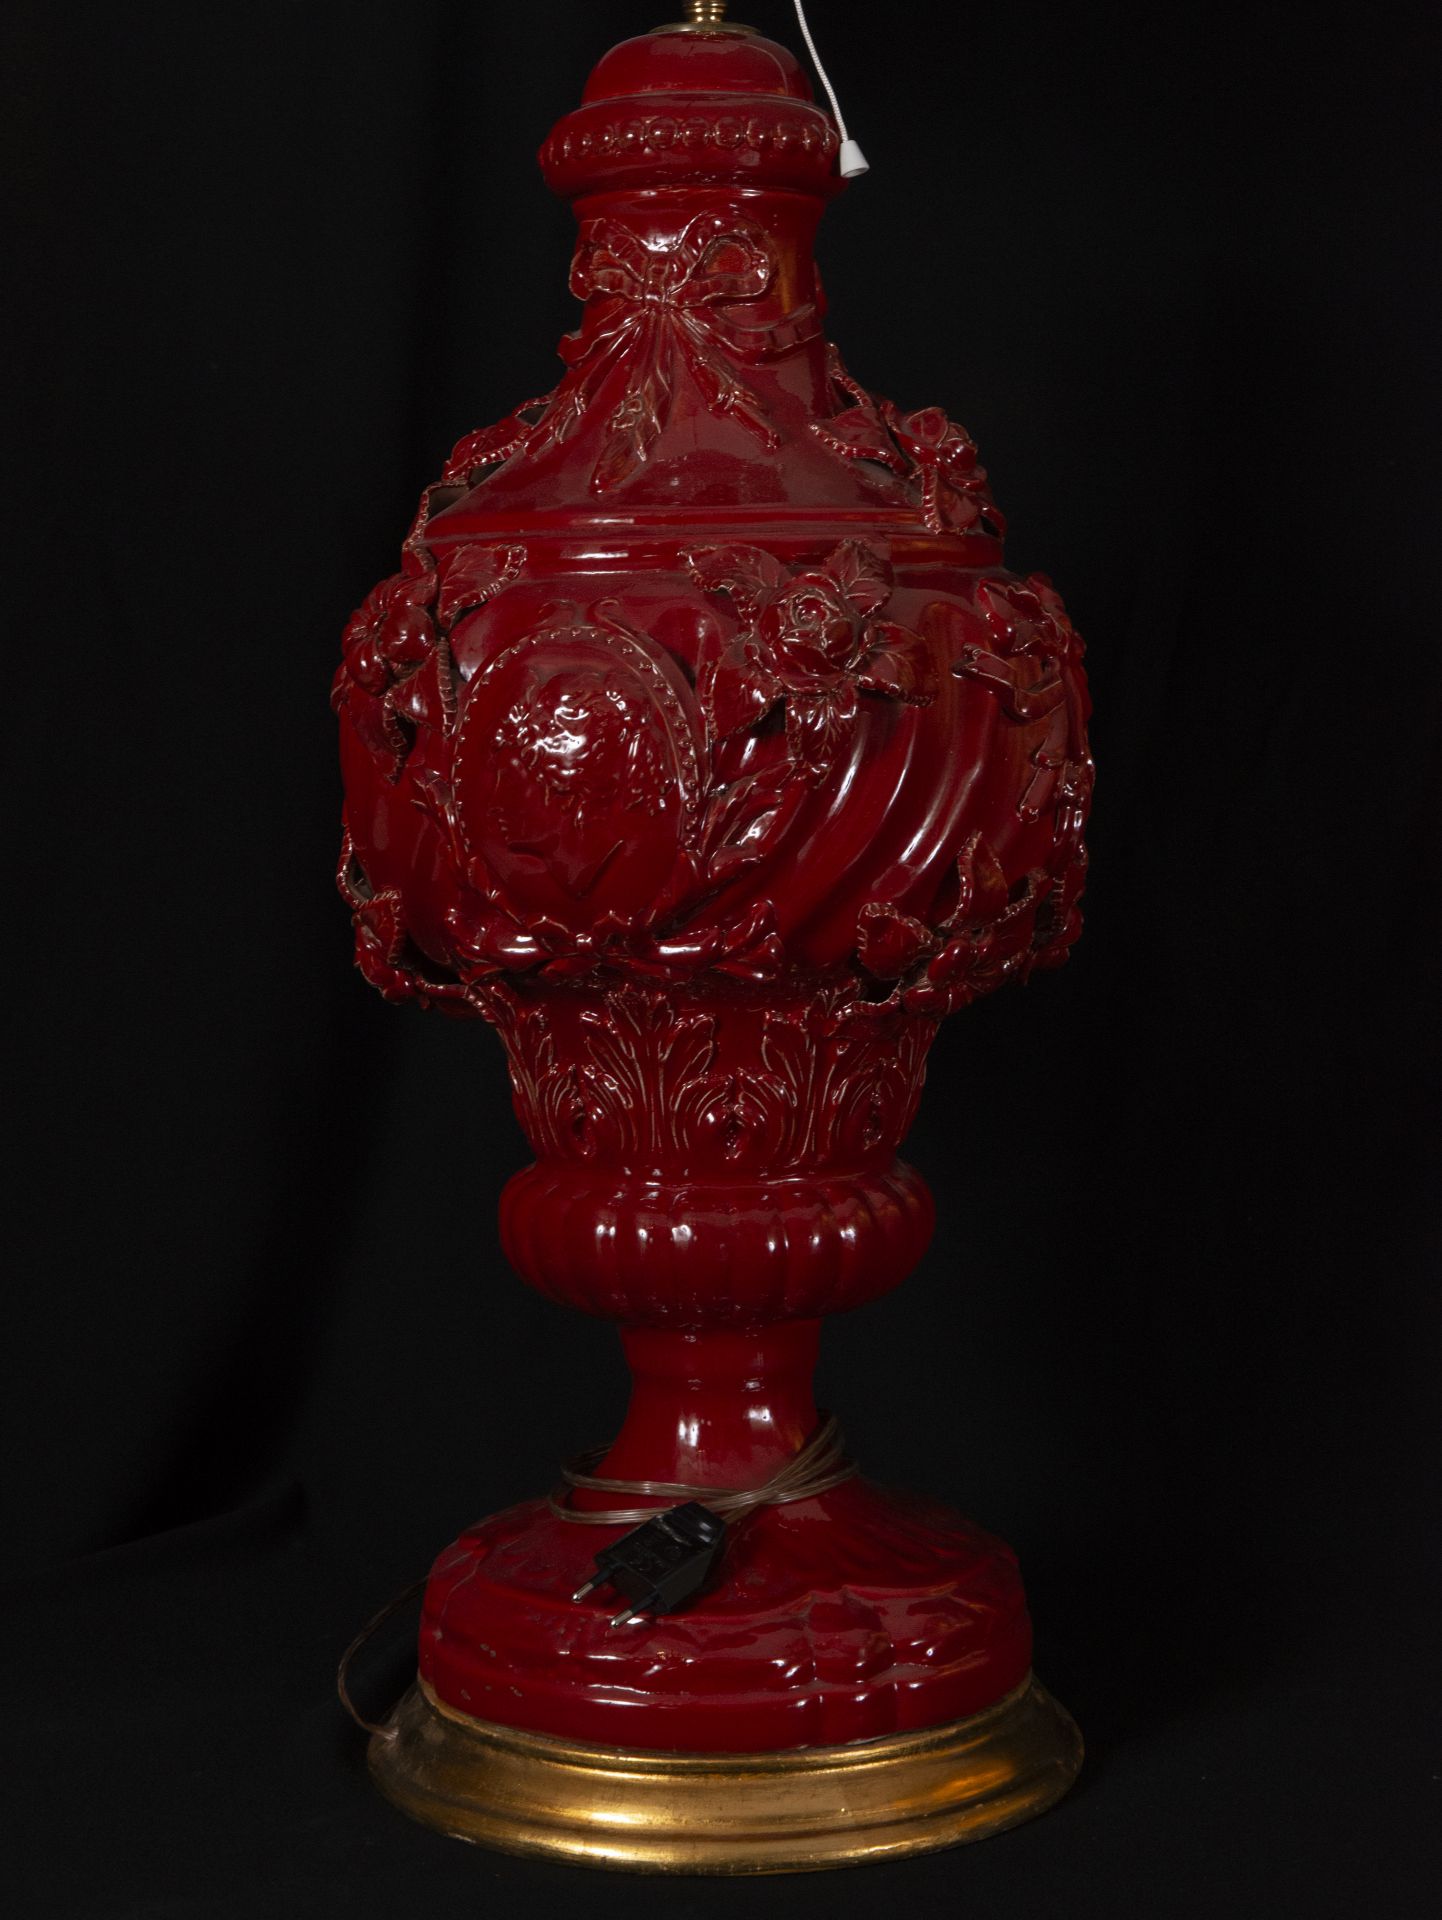 Elegant Pair of Lamps in red glazed ceramic from Manises and Toile de Jouy, 19th century - Image 5 of 5